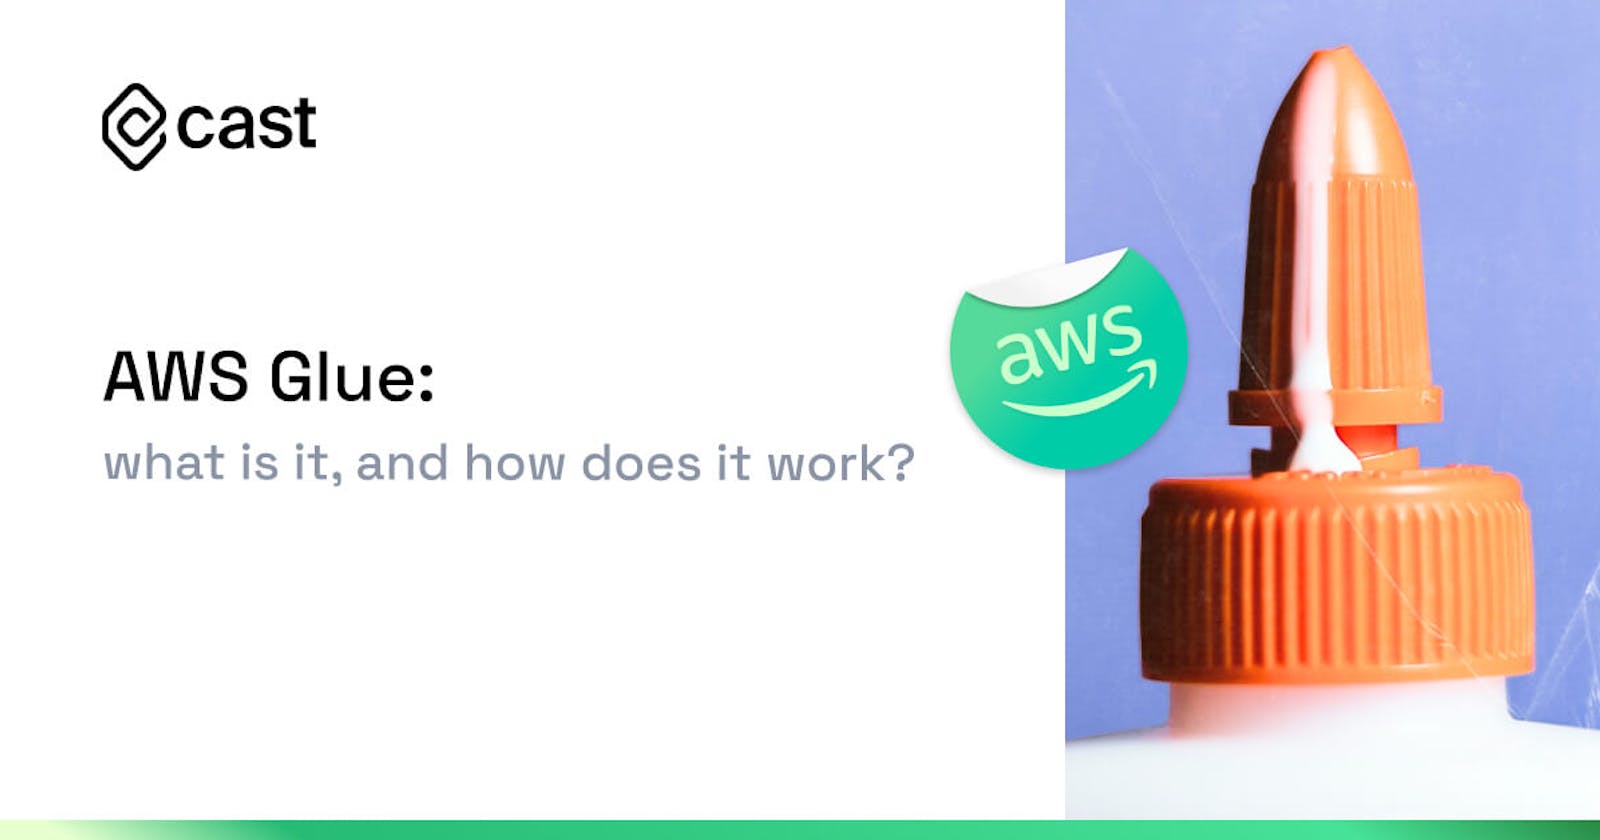 AWS Glue: what is it and how does it work?